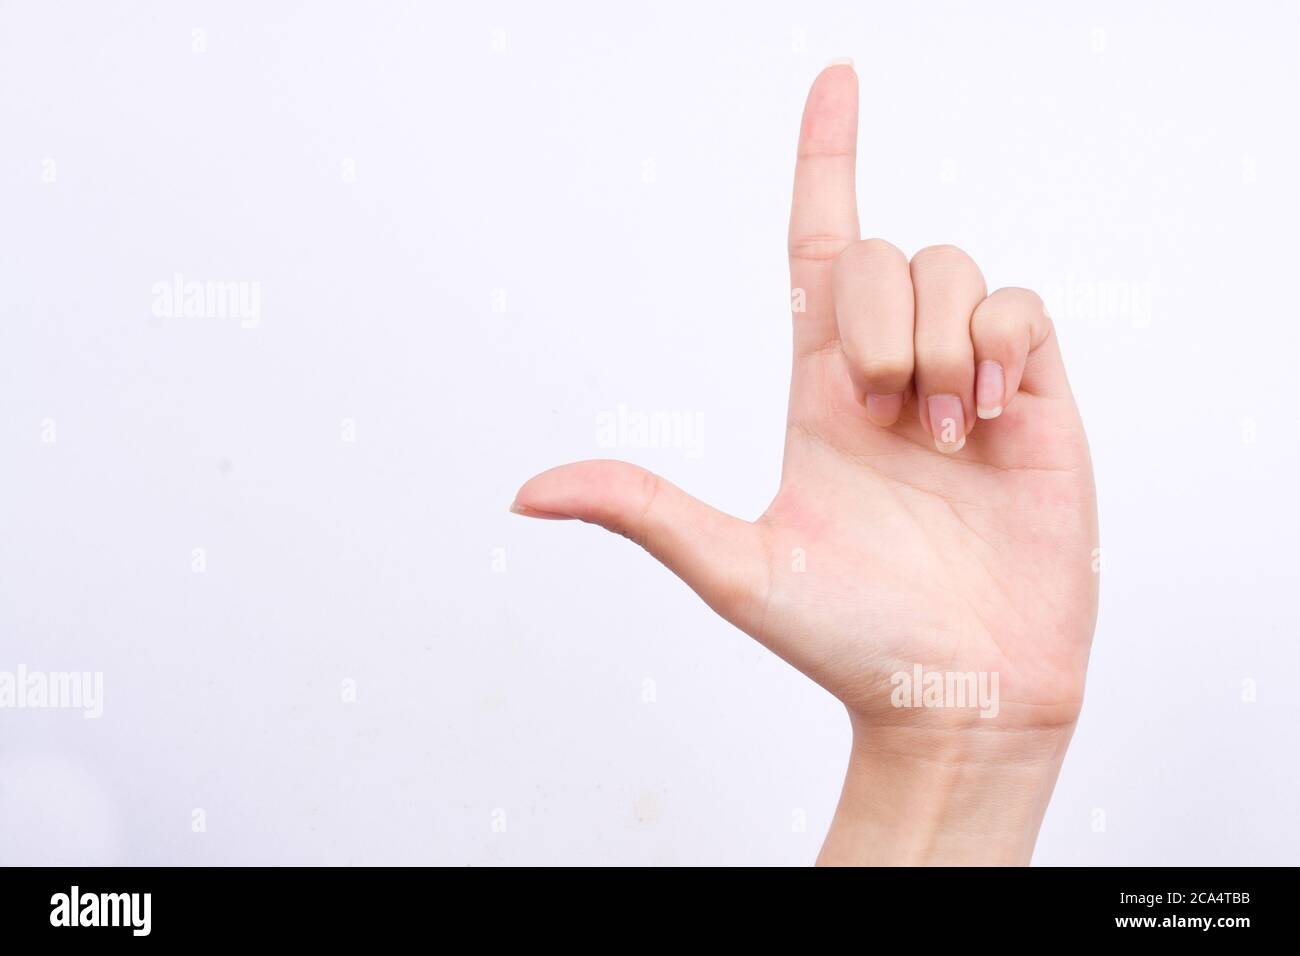 finger hand symbols isolated concept true alpha holding up the loser sign on the white background Stock Photo